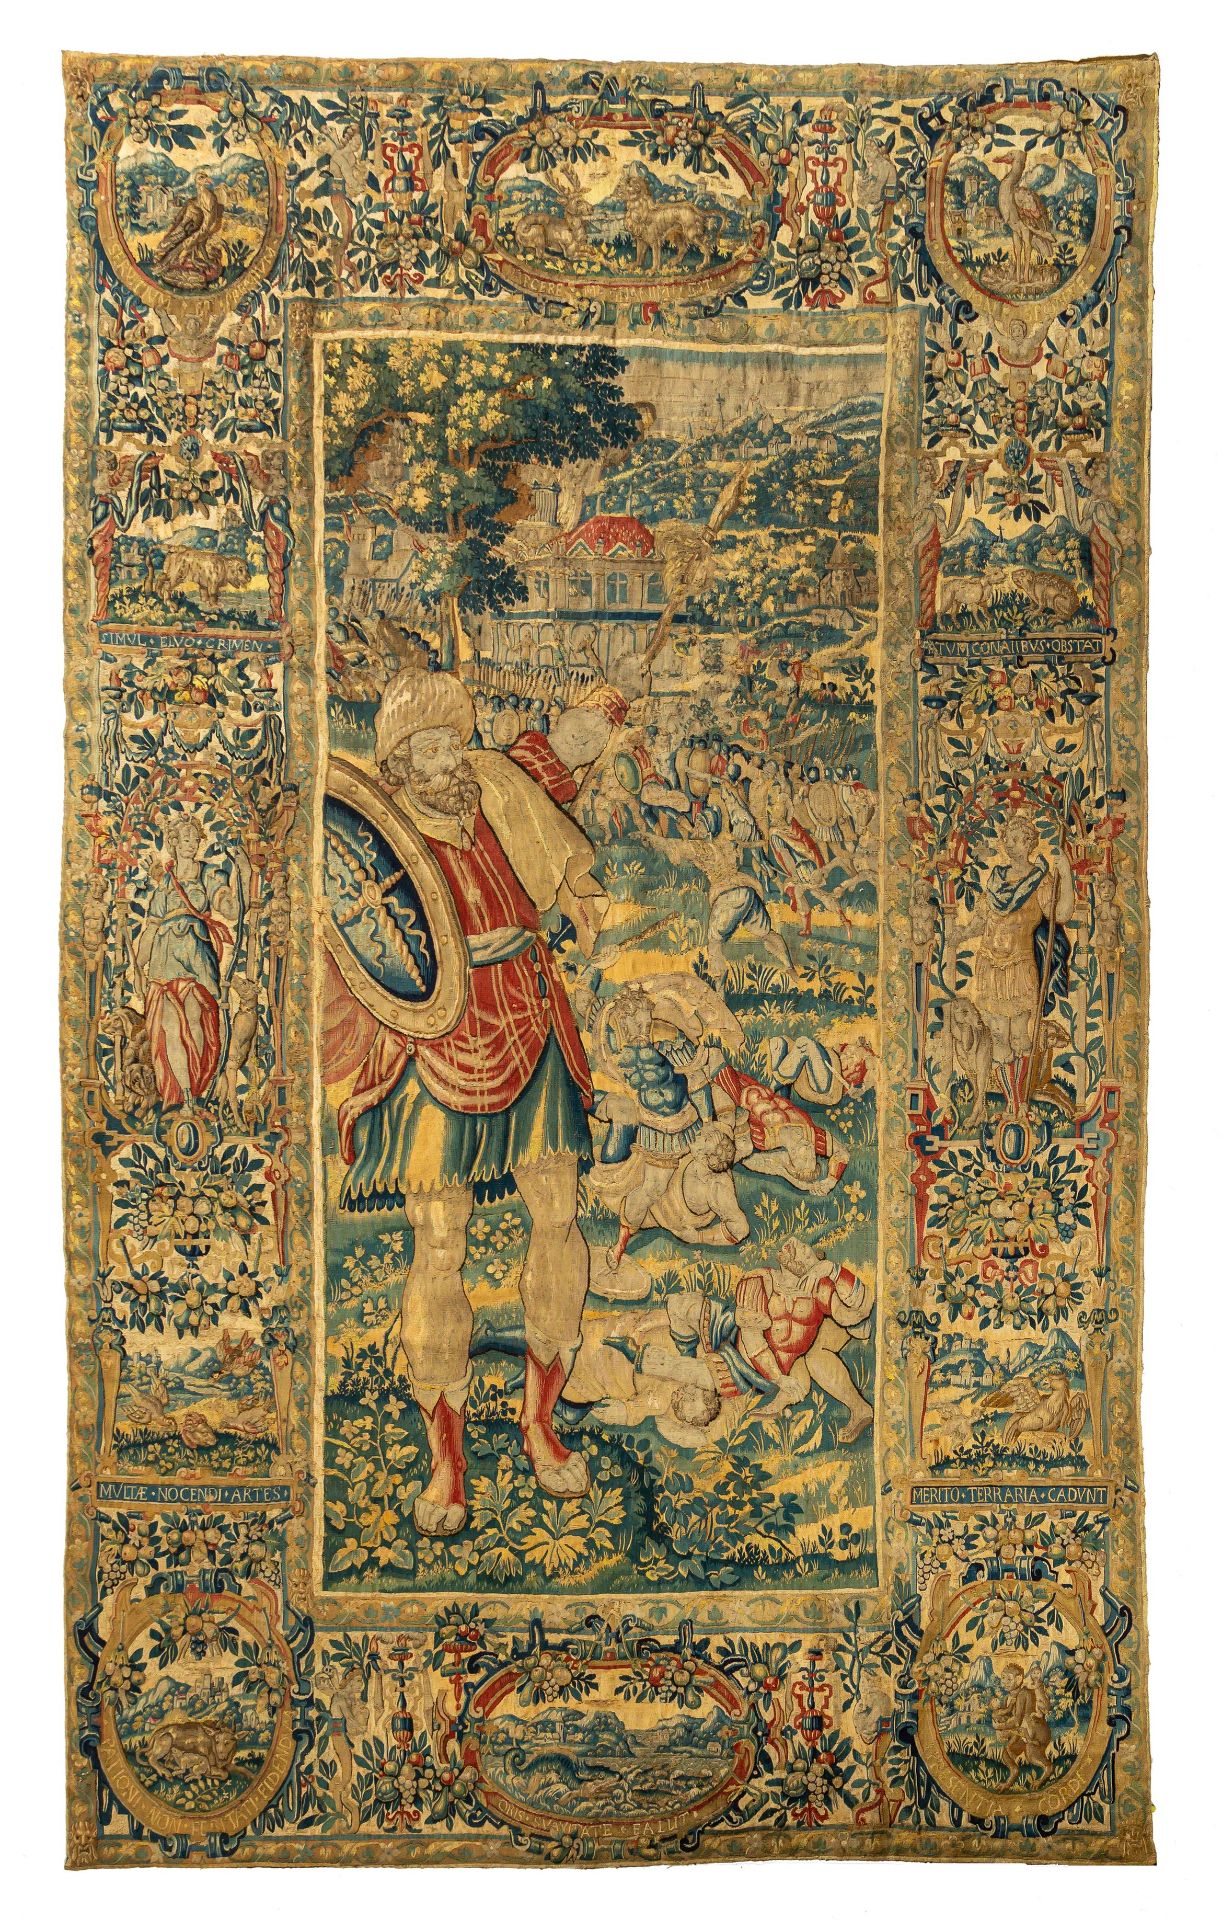 A 16thC Brussels wall tapestry depicting a battle scene, ca 1575-1585, 186 x 306 cm